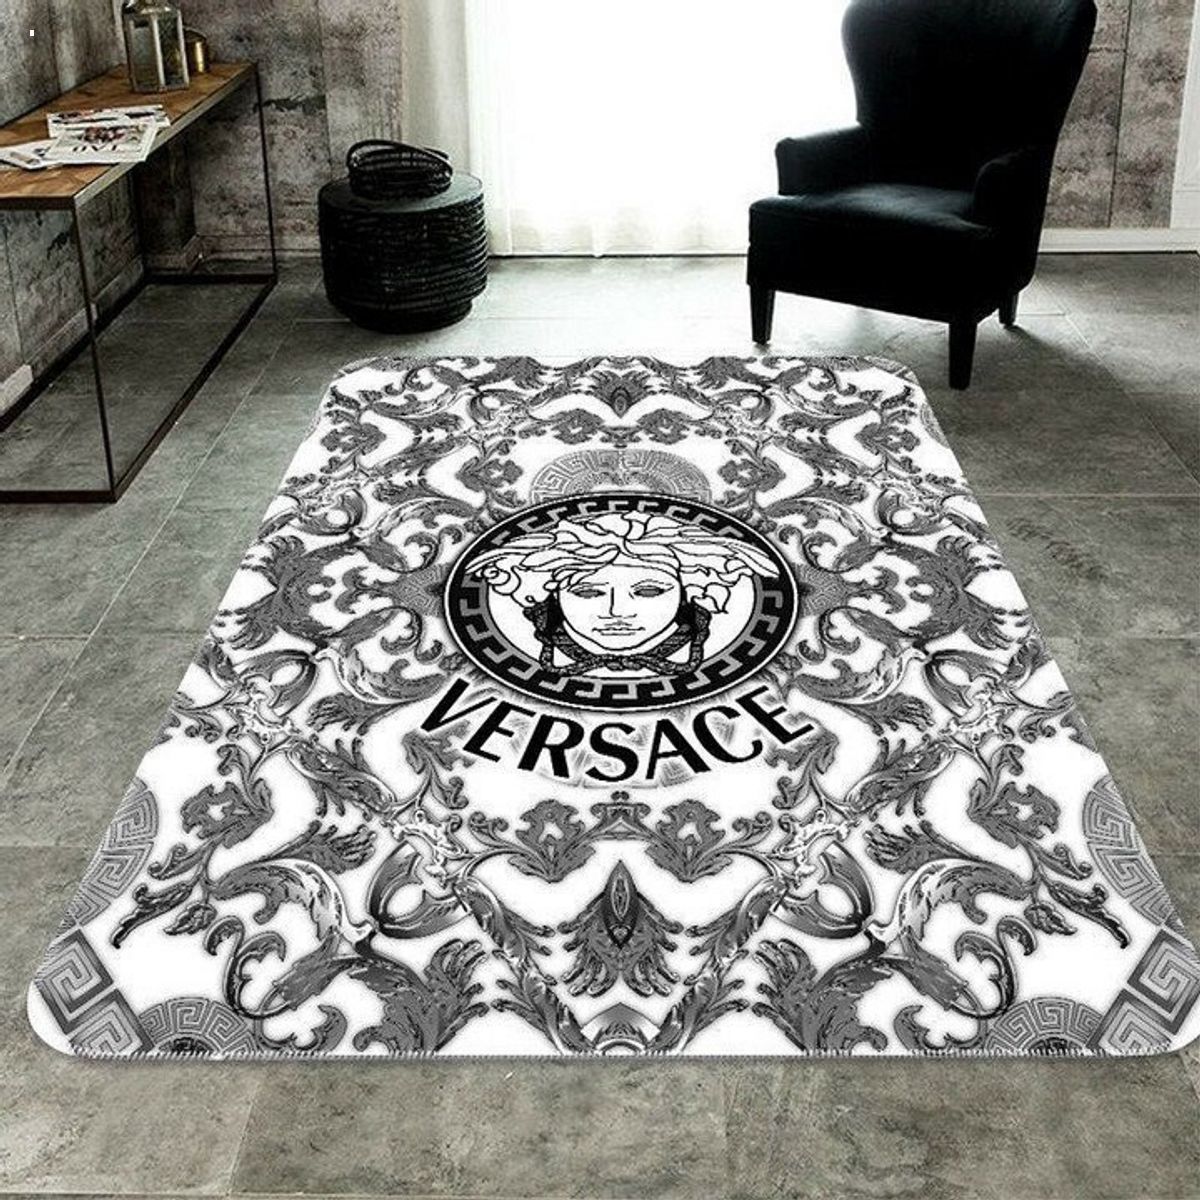 Versace Full Printing Pattern Luxury Brand Carpet Rug Limited Edition